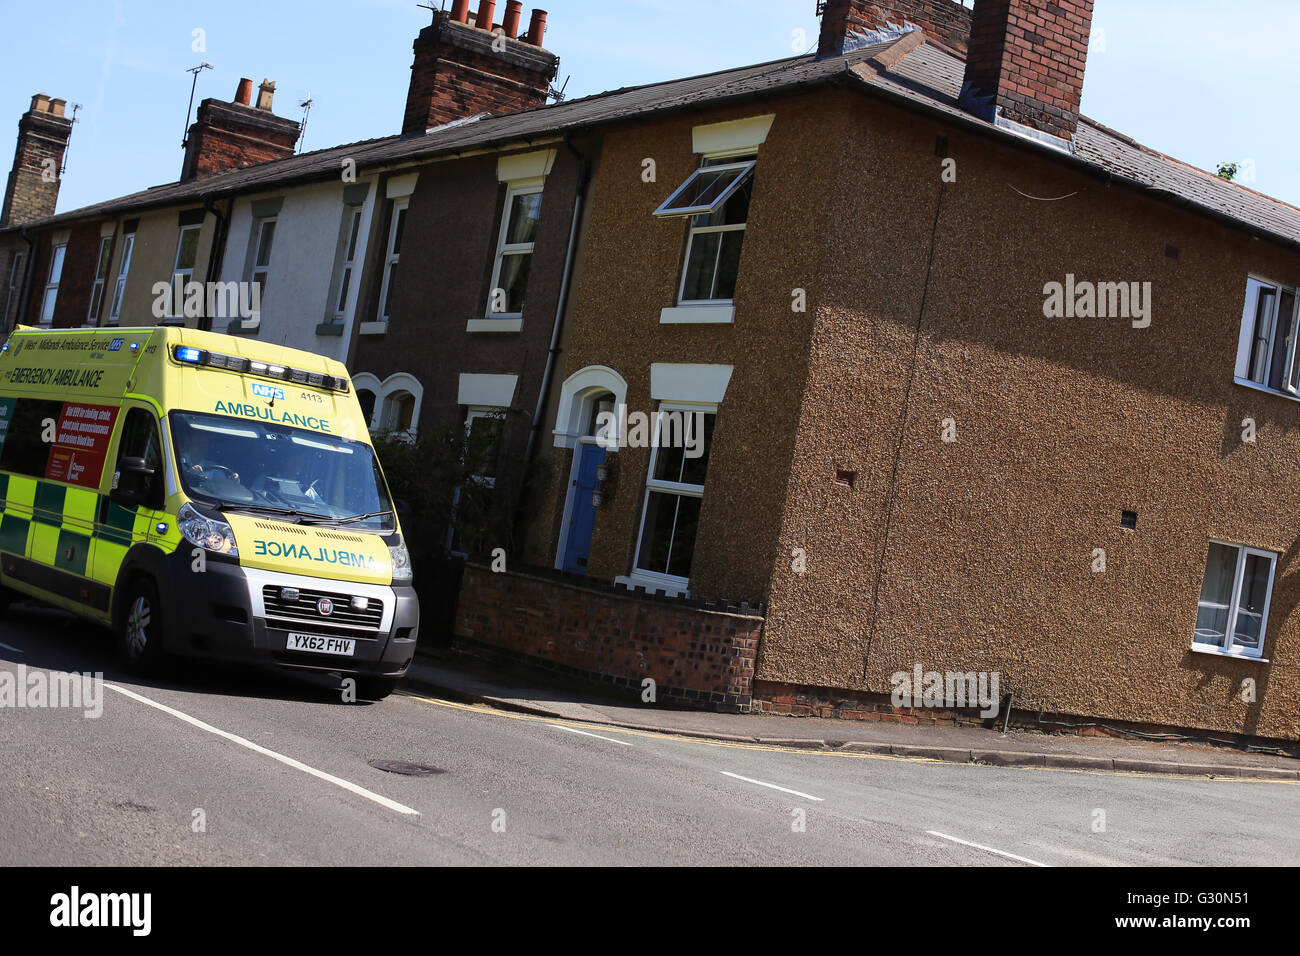 A West Midlands ambulance on an emergency call in Staffordshire Stock Photo